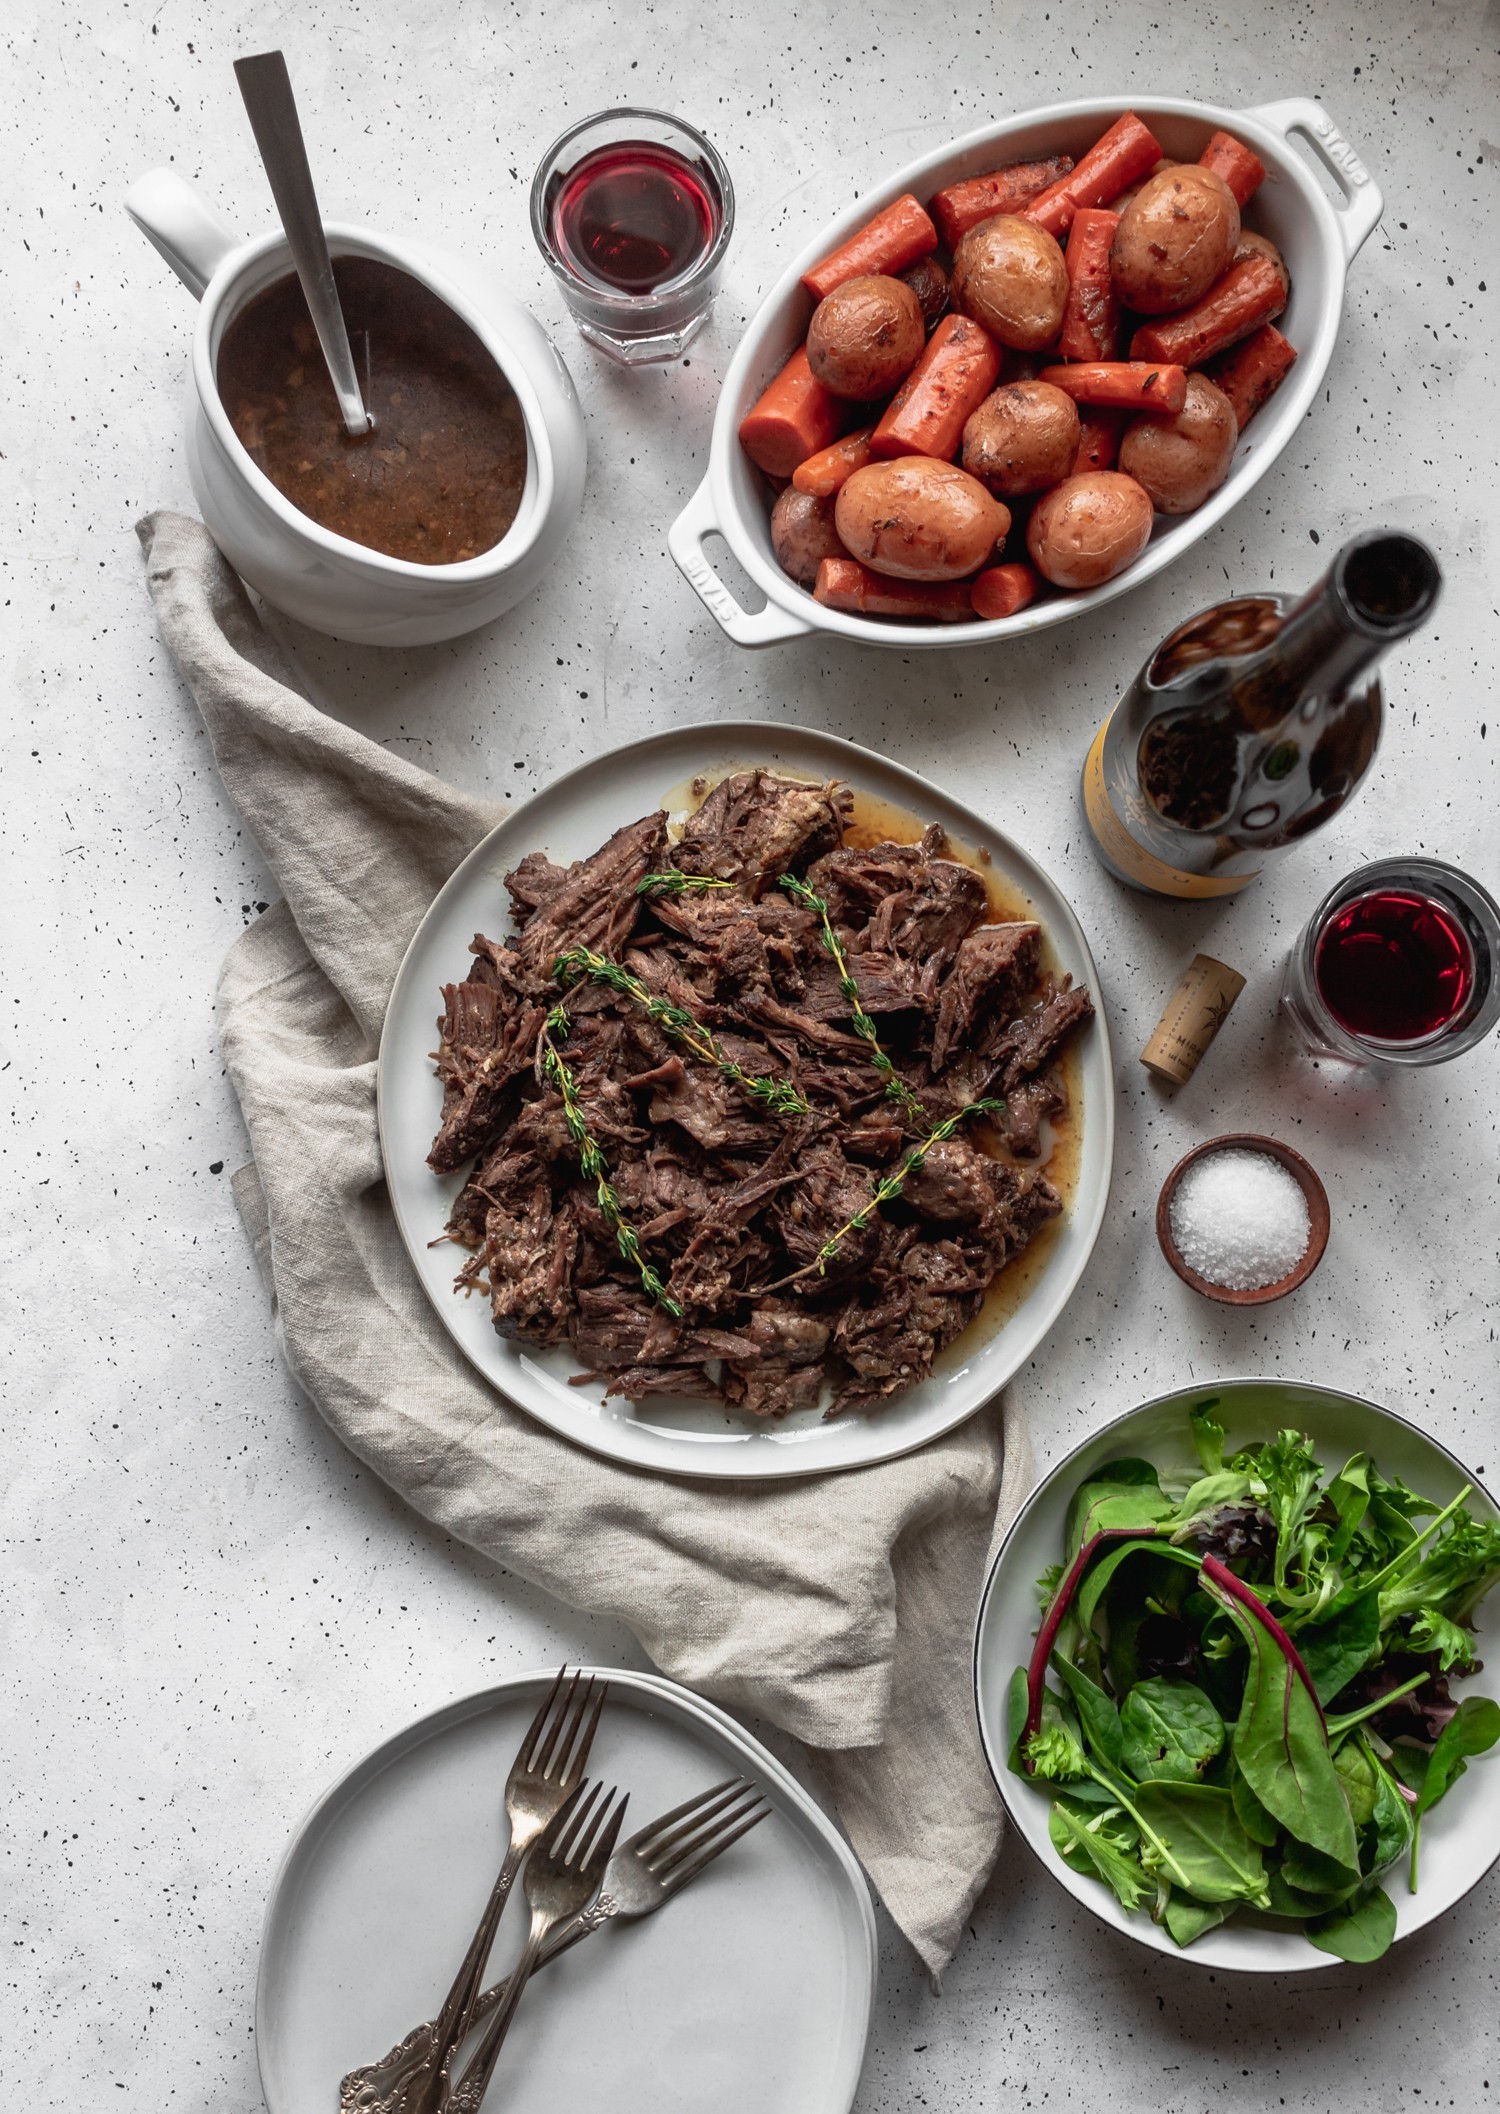 A platter of pot roast on a white background surrounded by a plate of vegetables, a bowl of salad, gravy, and red wine.